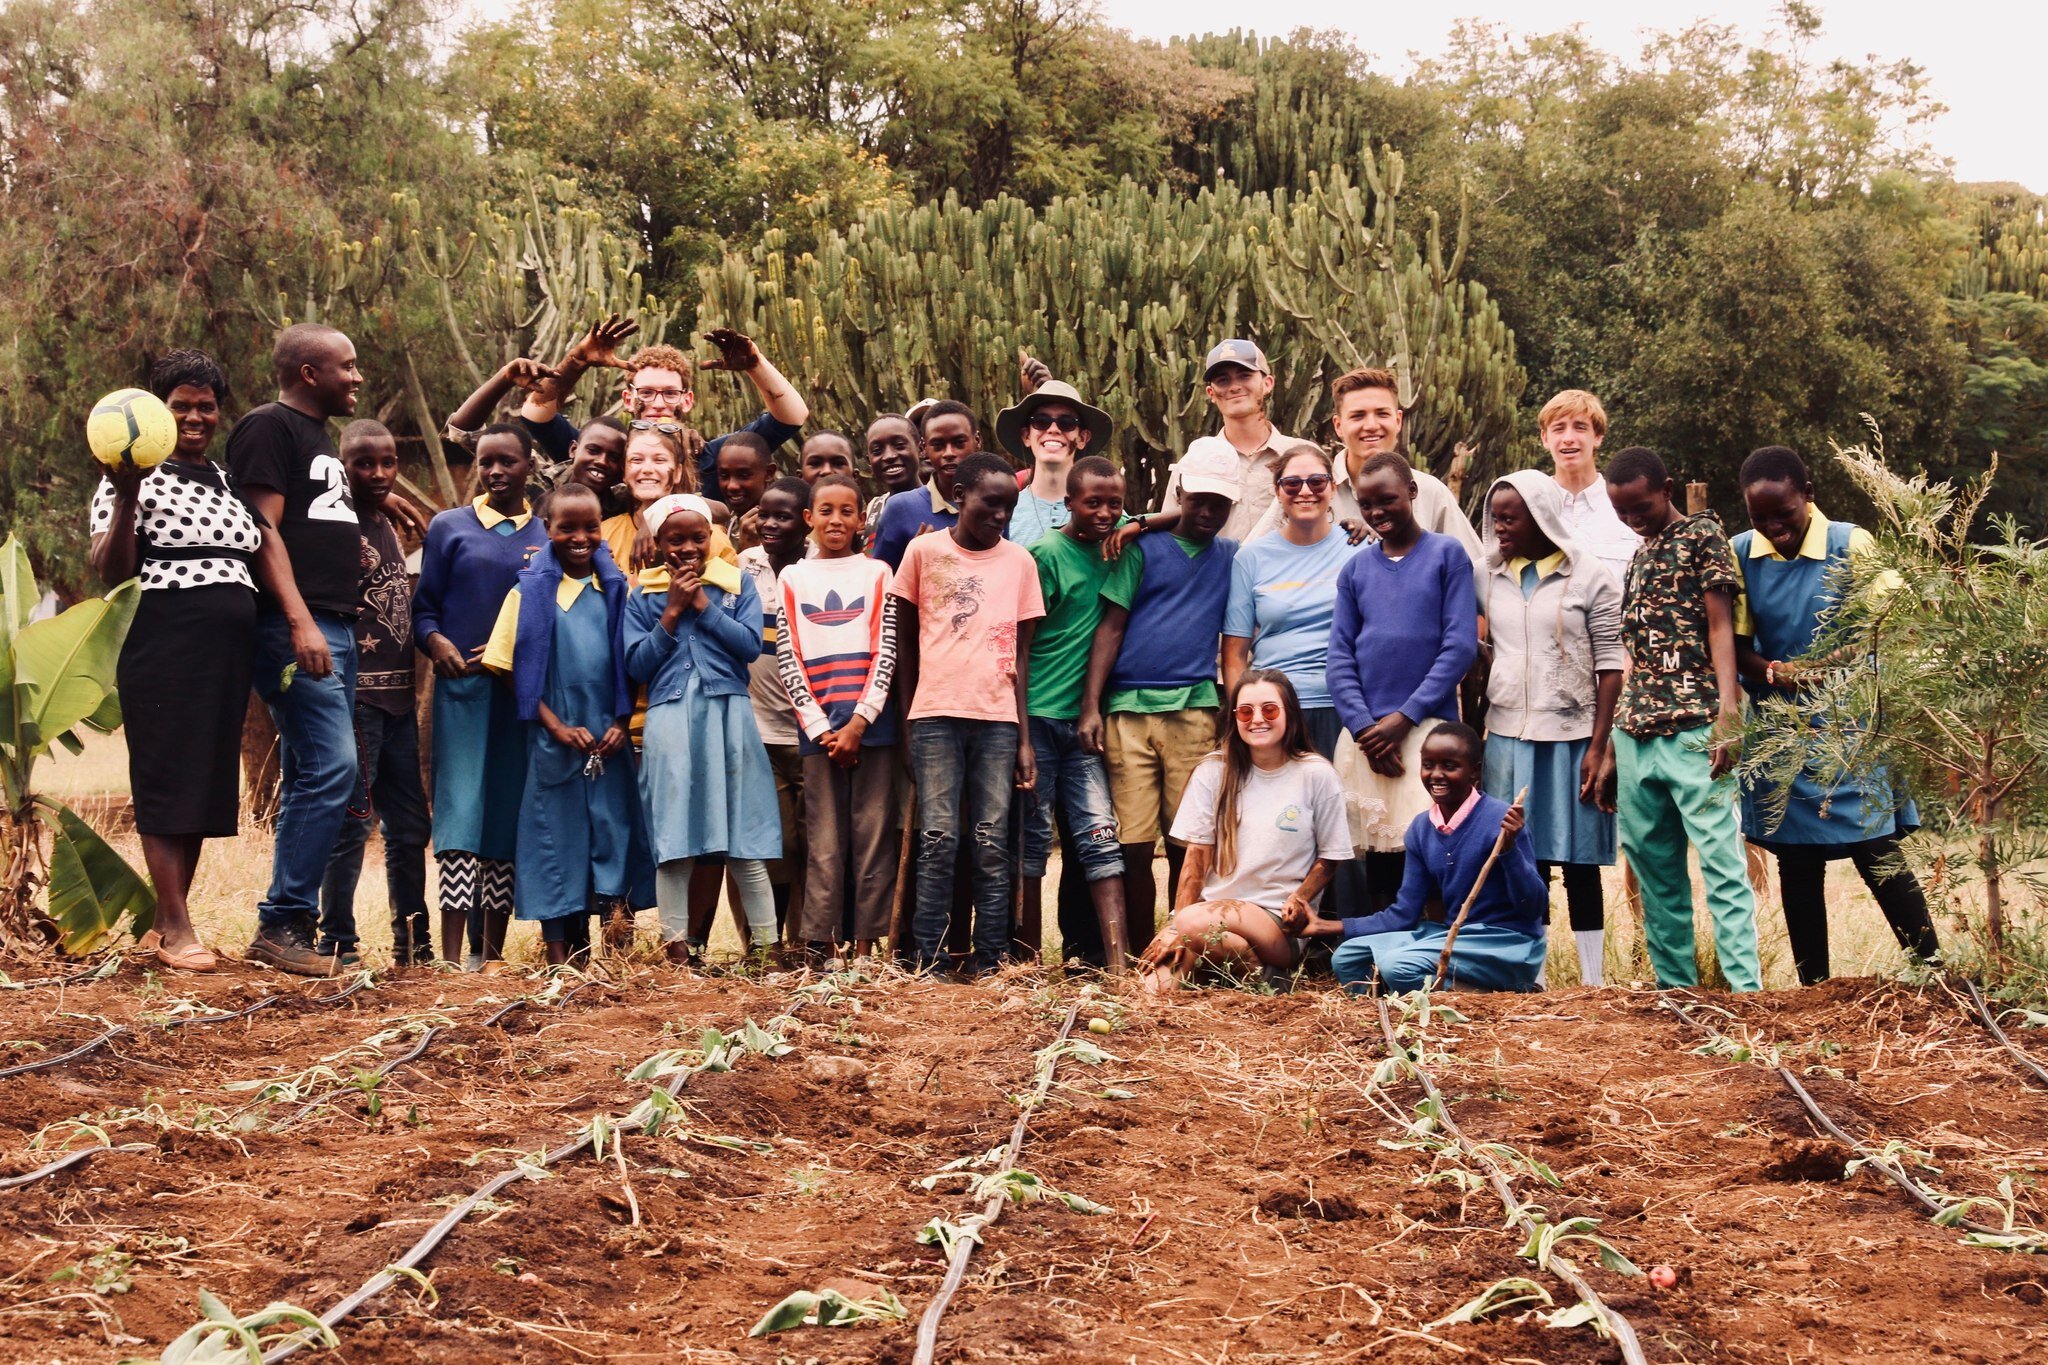 At YC, we&rsquo;re all about #permaculture: on our program, you&rsquo;ll team up with local school students to learn how to plant and harvest crops in a way that respects and regenerates the land. 🌱

Learn more at the link in bio &mdash; no green th